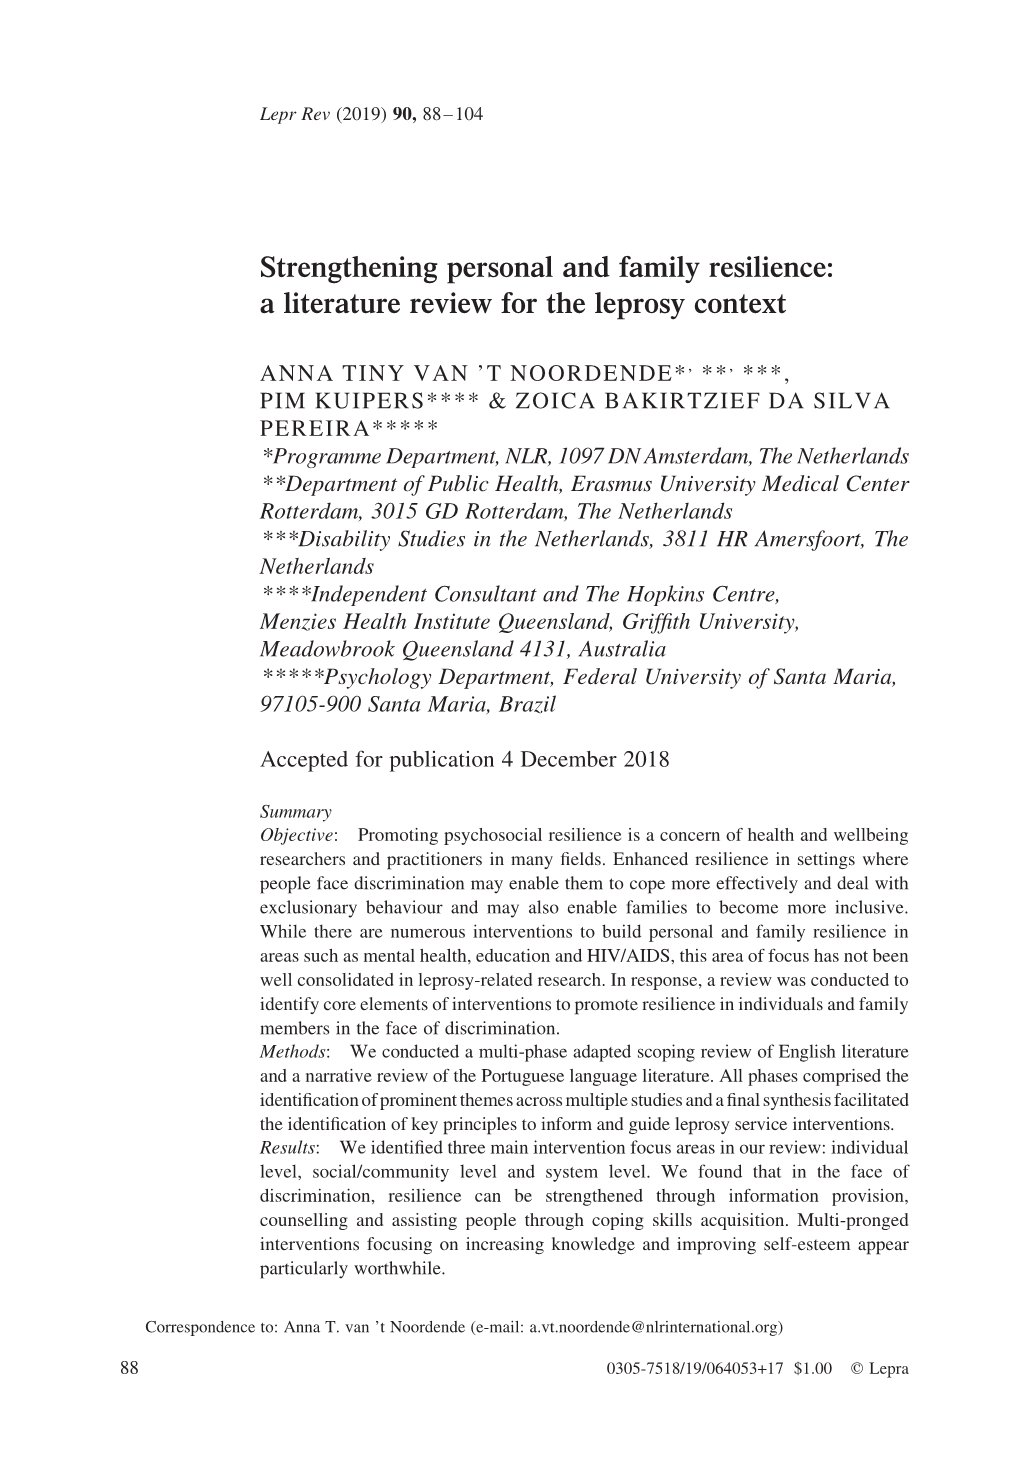 Strengthening Personal and Family Resilience: a Literature Review for the Leprosy Context